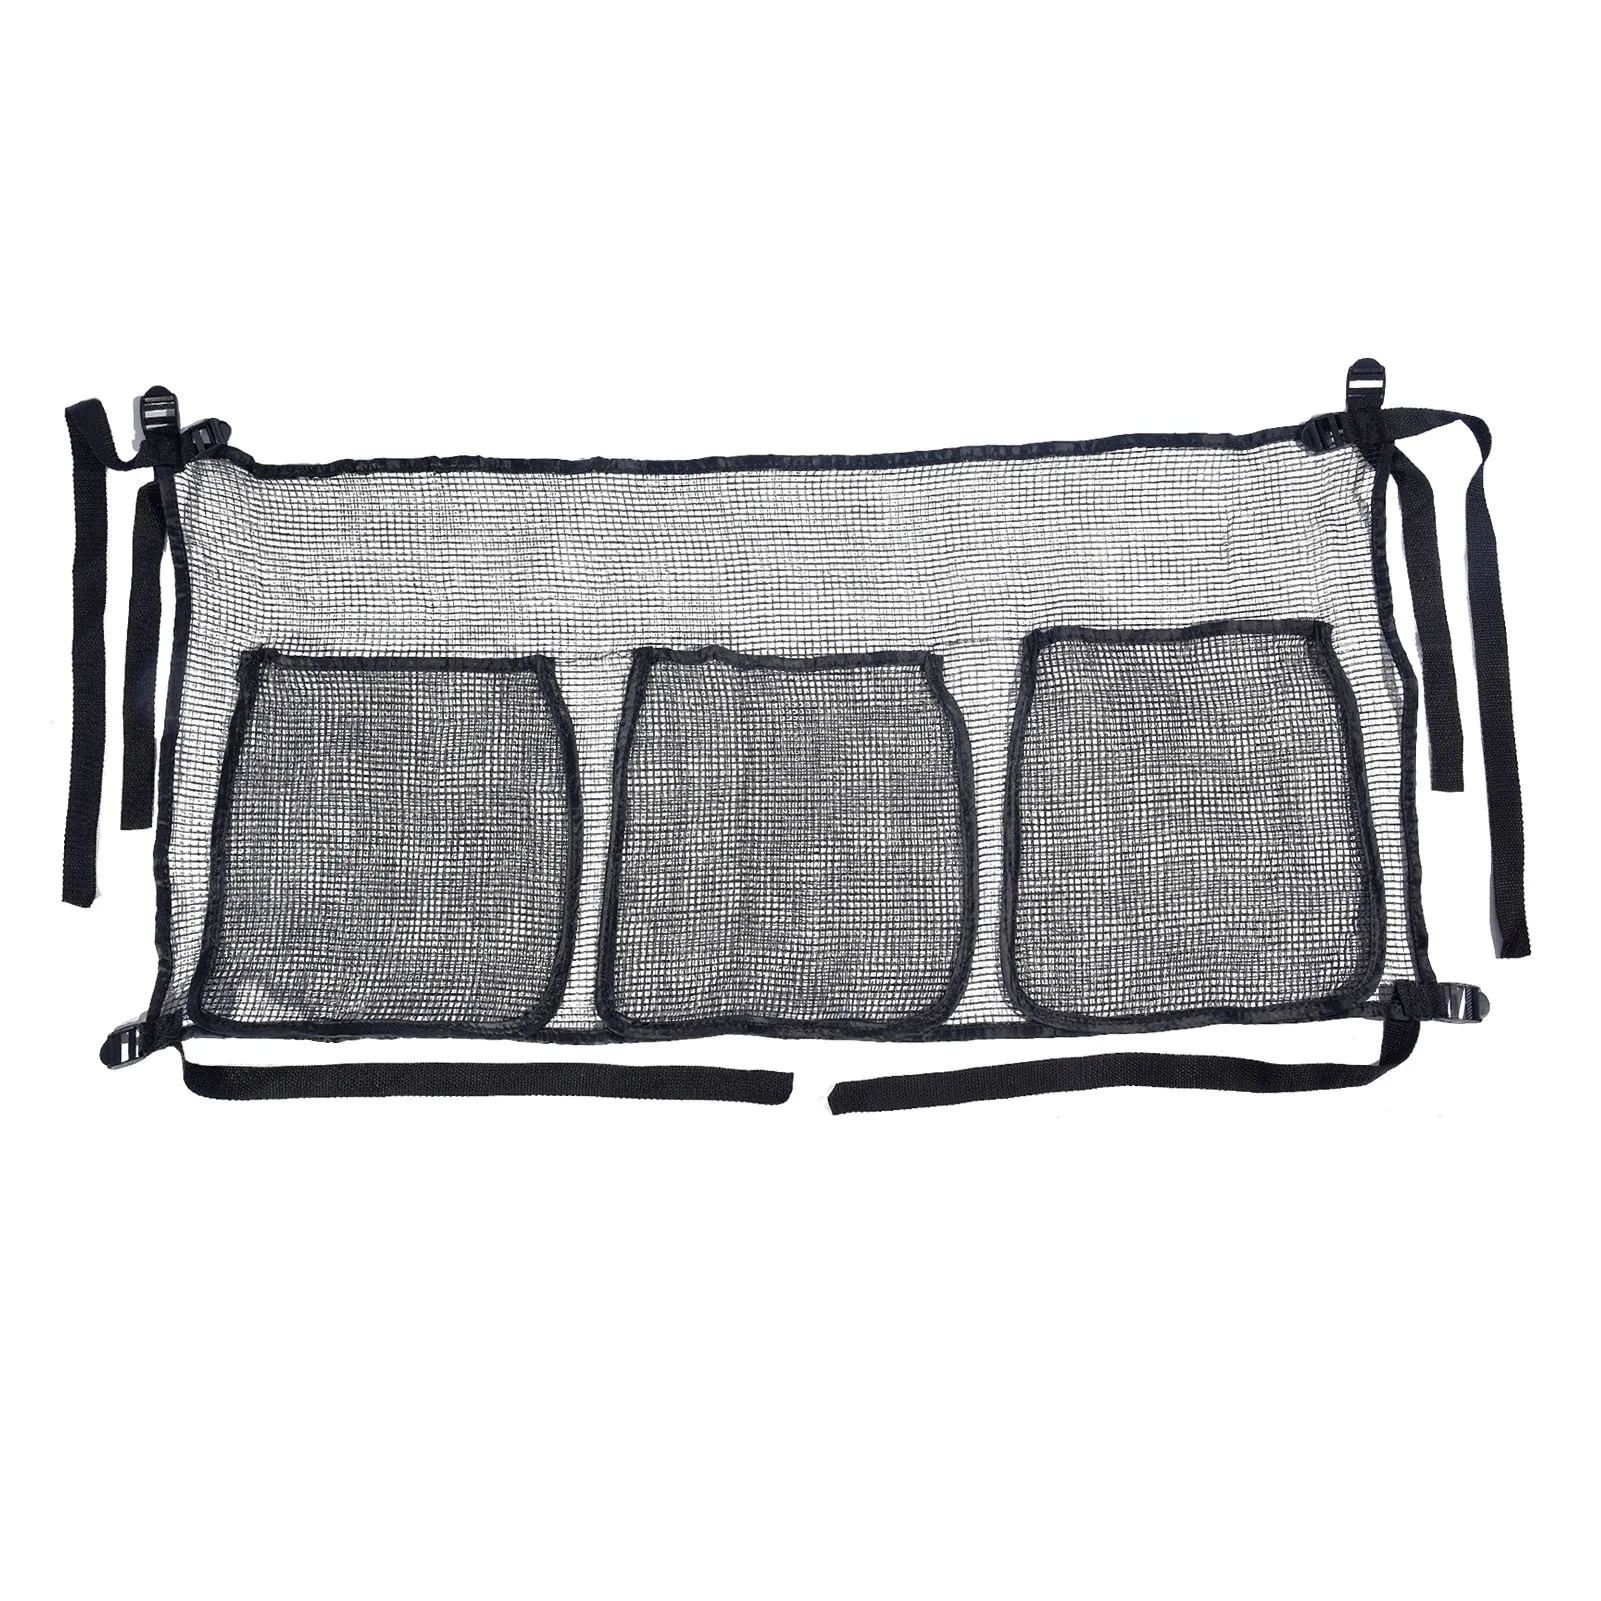 Trampoline Storage Mesh Bag With 4 Straps Toys Shoes Organizer Wall Decoration Storage Bag For Trampoline Accessories